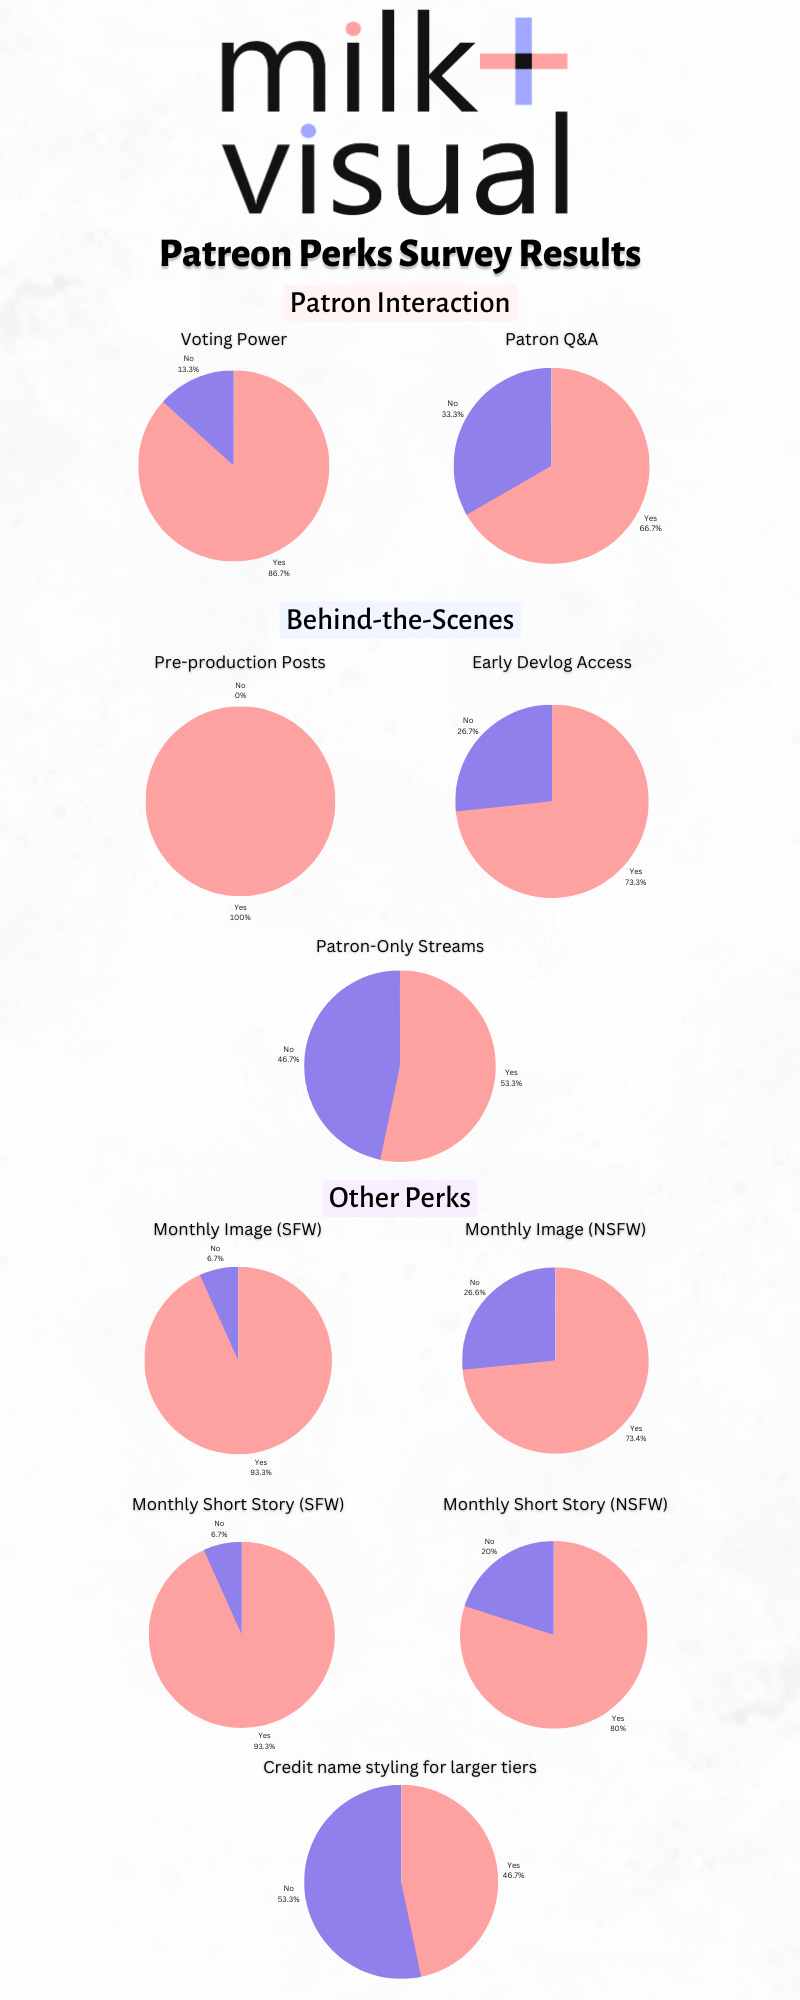 milk+ visual Patreon Perks Survey results infographic.  Voting power received 13.3% No and 86.7% Yes. Patron Q&A received 33.3% No and 66.7% Yes. Pre-production posts received 100% yes. Early devlog access received 26.7% no and 73.3% yes. Patron-only streams received 46.7% No and 53.3% Yes. Monthly image (SFW) received 6.7% No and 93.3% Yes. Monthly image (nsfw) received 26.6% No and 73.4% Yes. Monthly short story (sfw) received 6.7% No and 93.3% Yes. Monthly short story (nsfw) received 20% No and 80% Yes. Credit name styling for larger tiers received 53.3% No and 46.7% Yes.